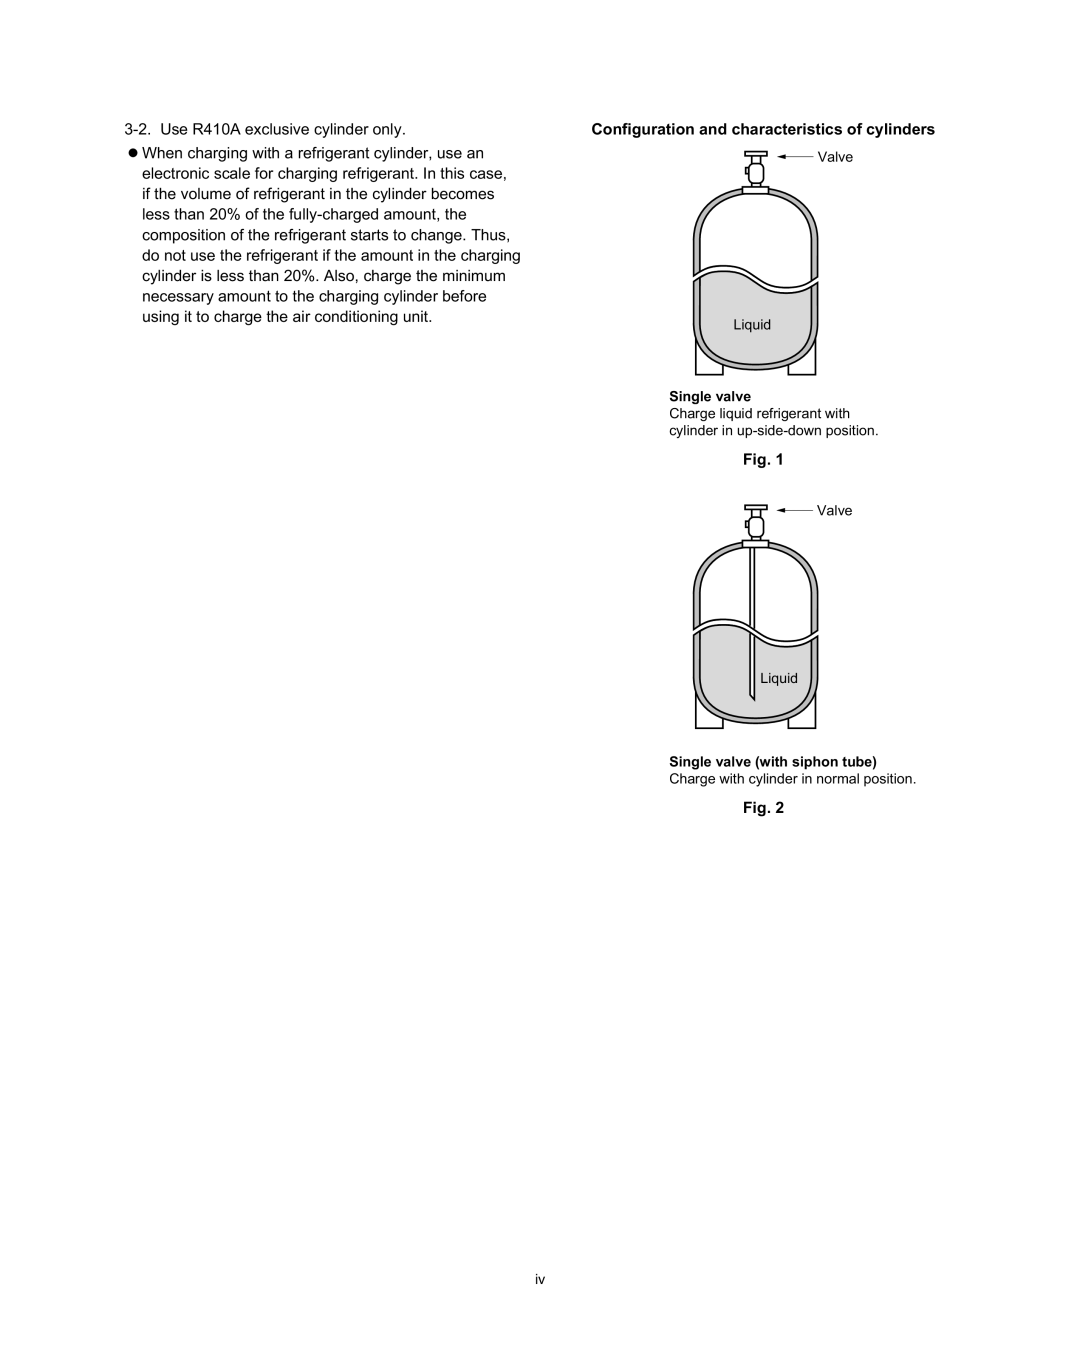 Panasonic R410A service manual Configuration and characteristics of cylinders, Fig 